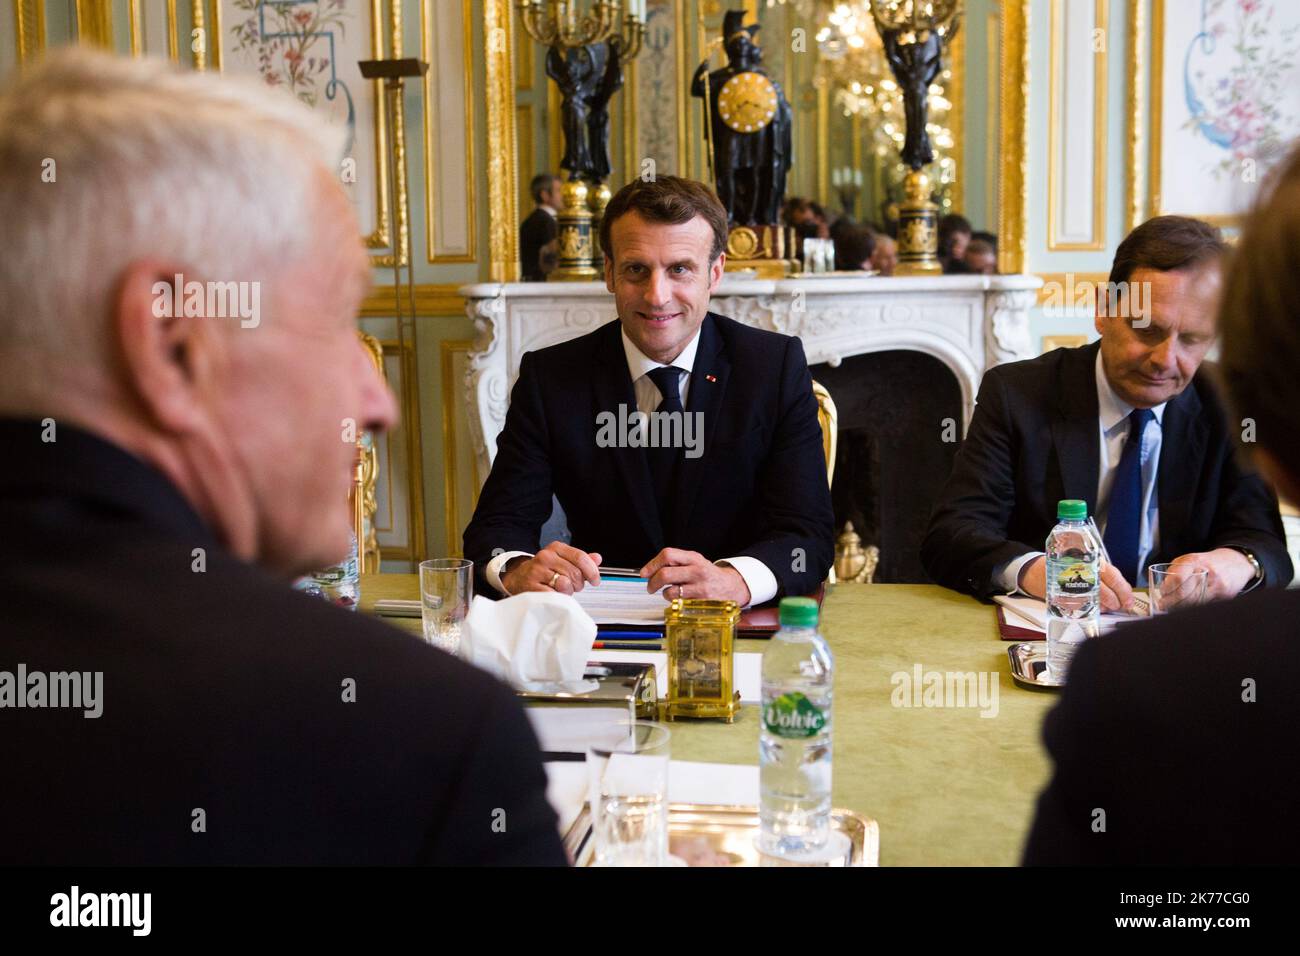 POOL French President Emmanuel Macron as he welcomes the Secretary General of the Council of Europe Thorbjorn Jagland at the Elysee Palace in Paris on May 6, 2019.  Photo by Raphael Lafargue/ABACAPRESS.COM POOL/Raphael Lafargue/MAXPPP Stock Photo